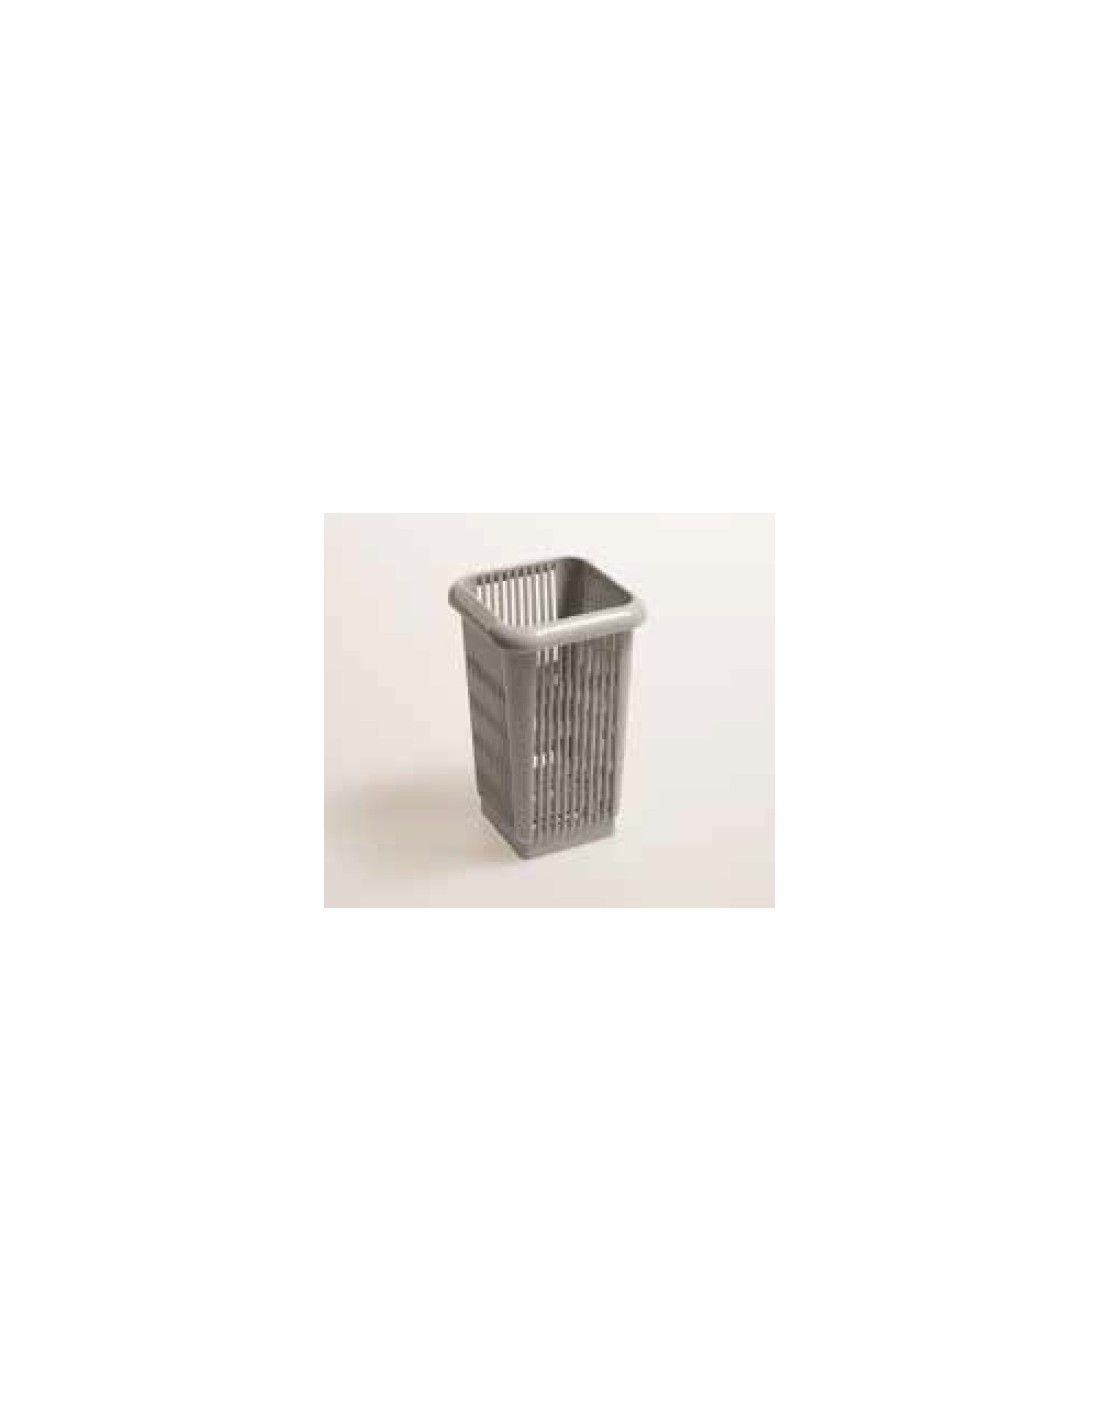 Wall mounted basket - Dimensions cm 11 x 11 x 14 h